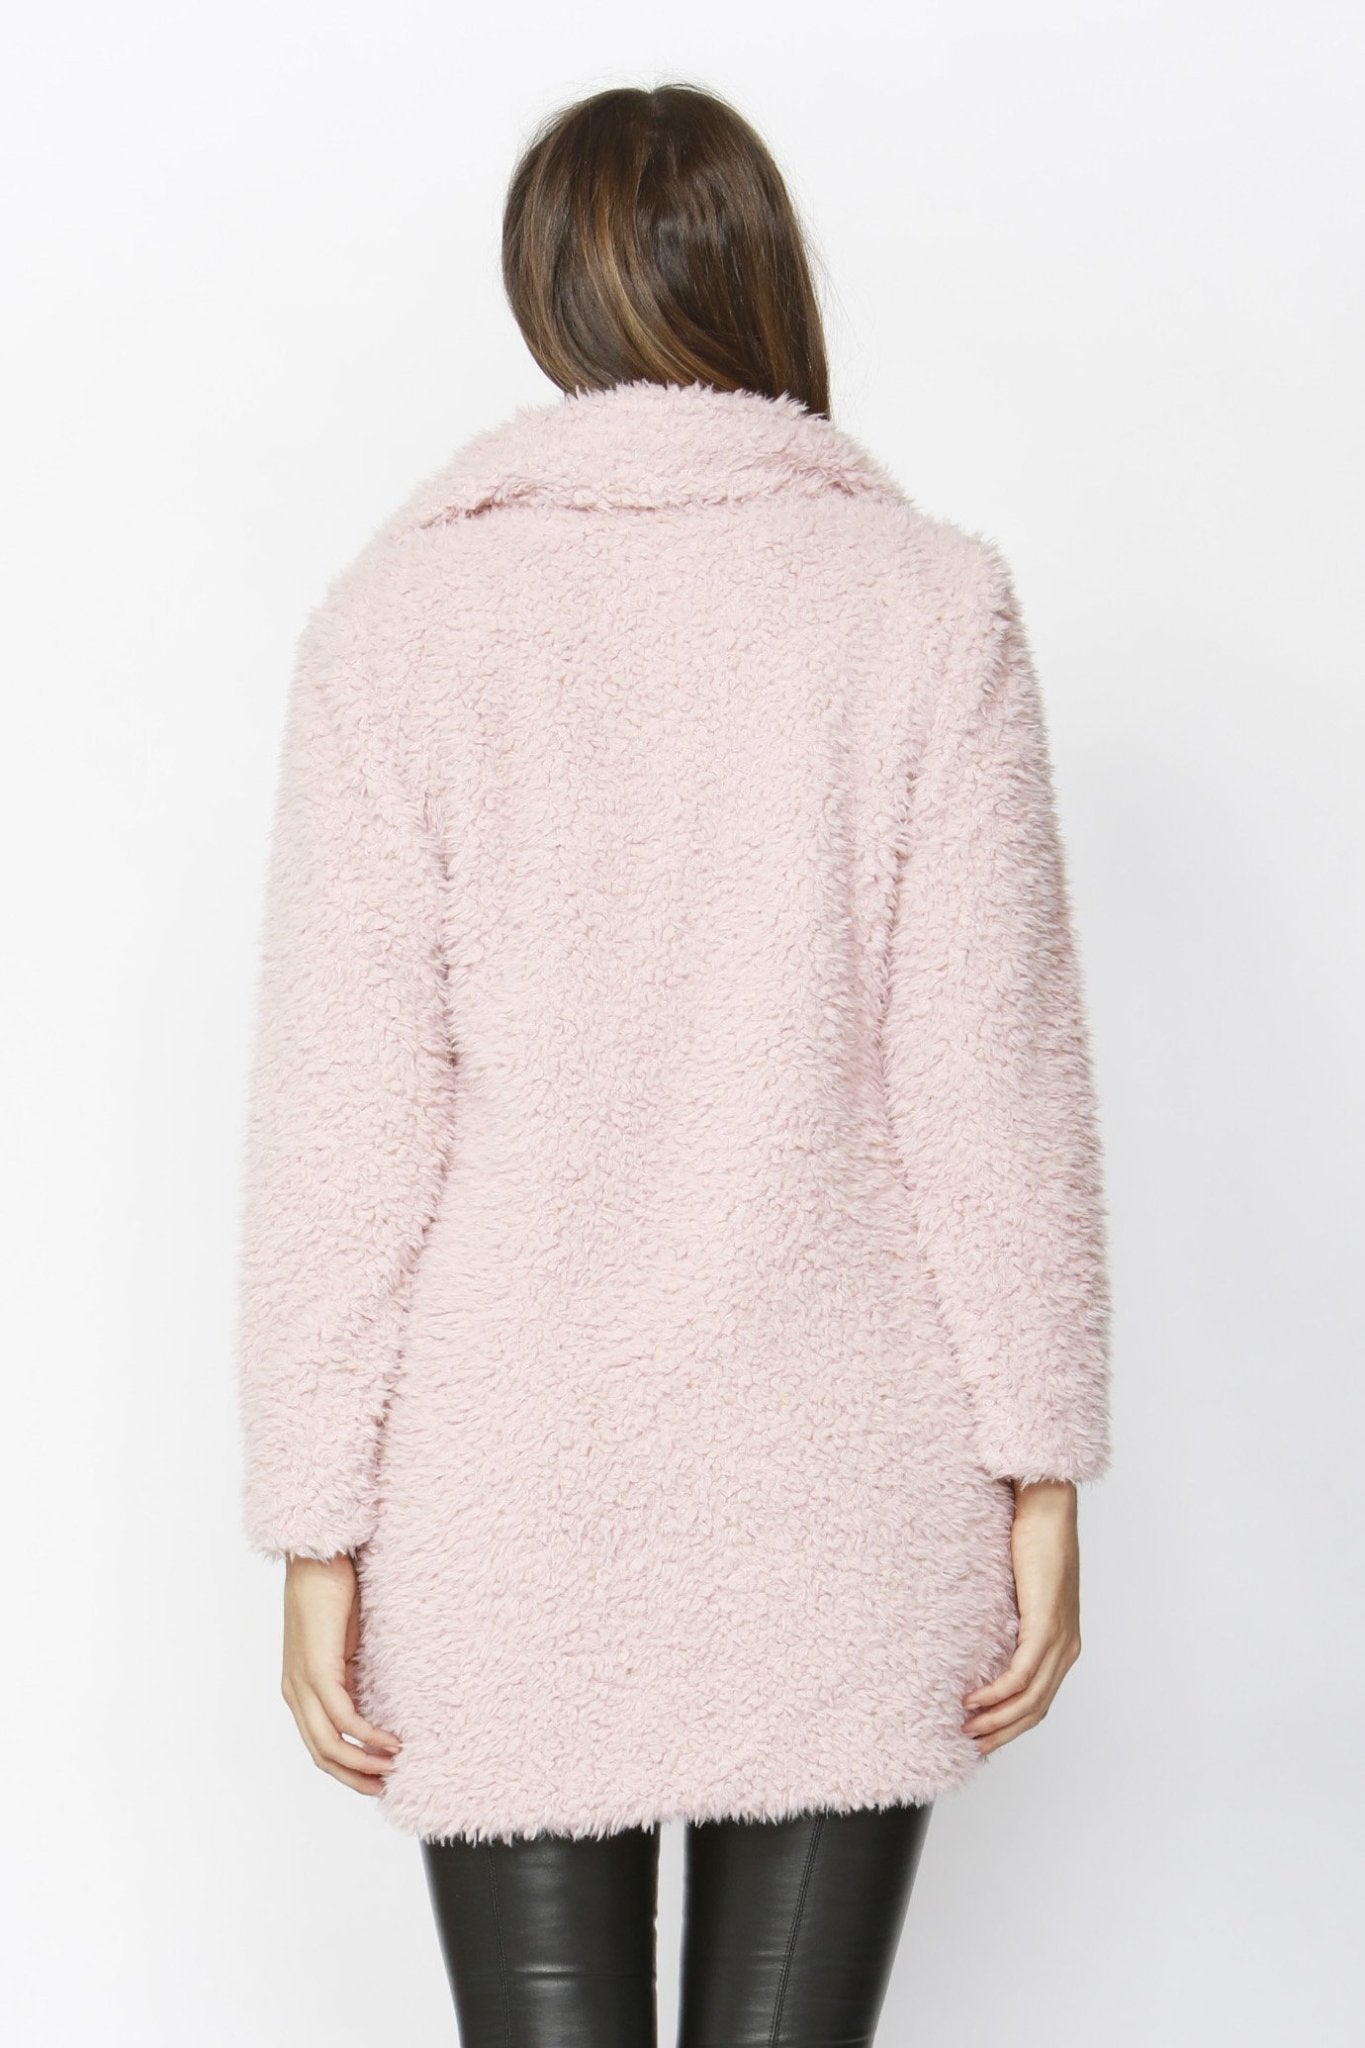 Sass Lolly Lover Coat in Pink - Hey Sara